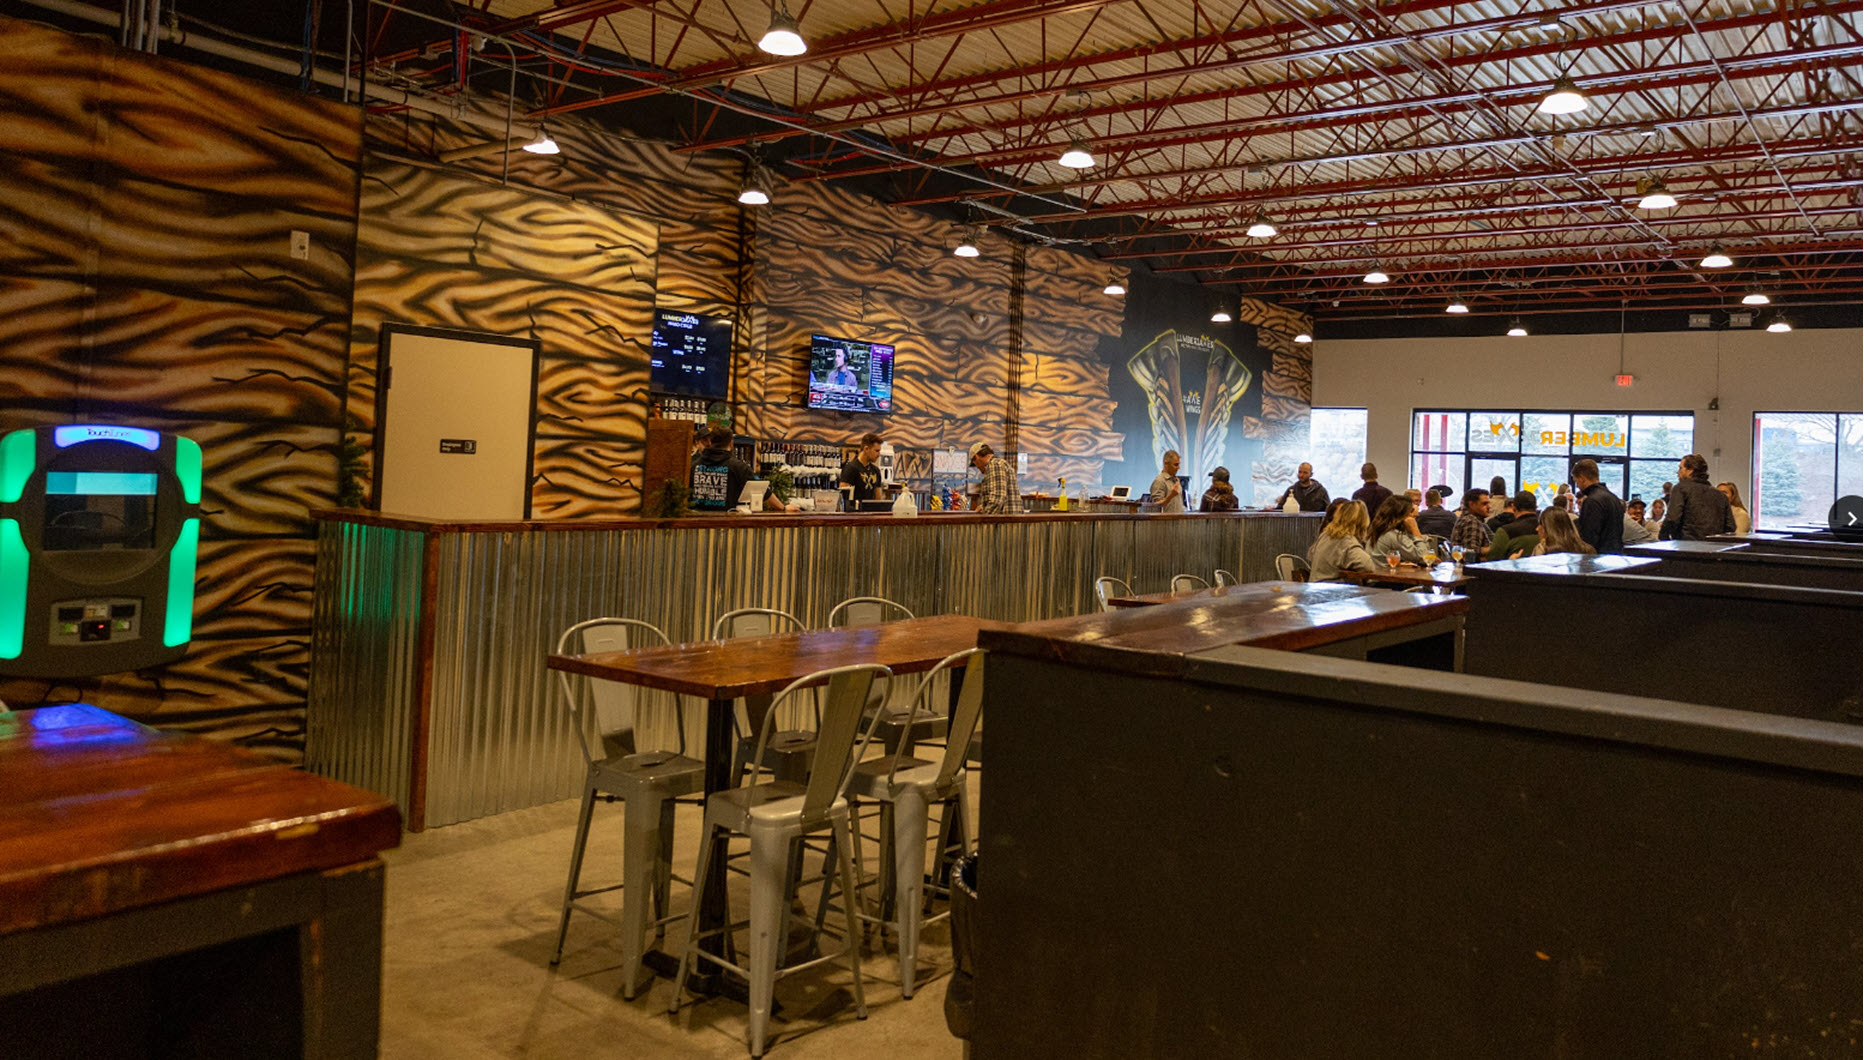 the large bar and banquet area of Lumberjaxes axe throwing venue